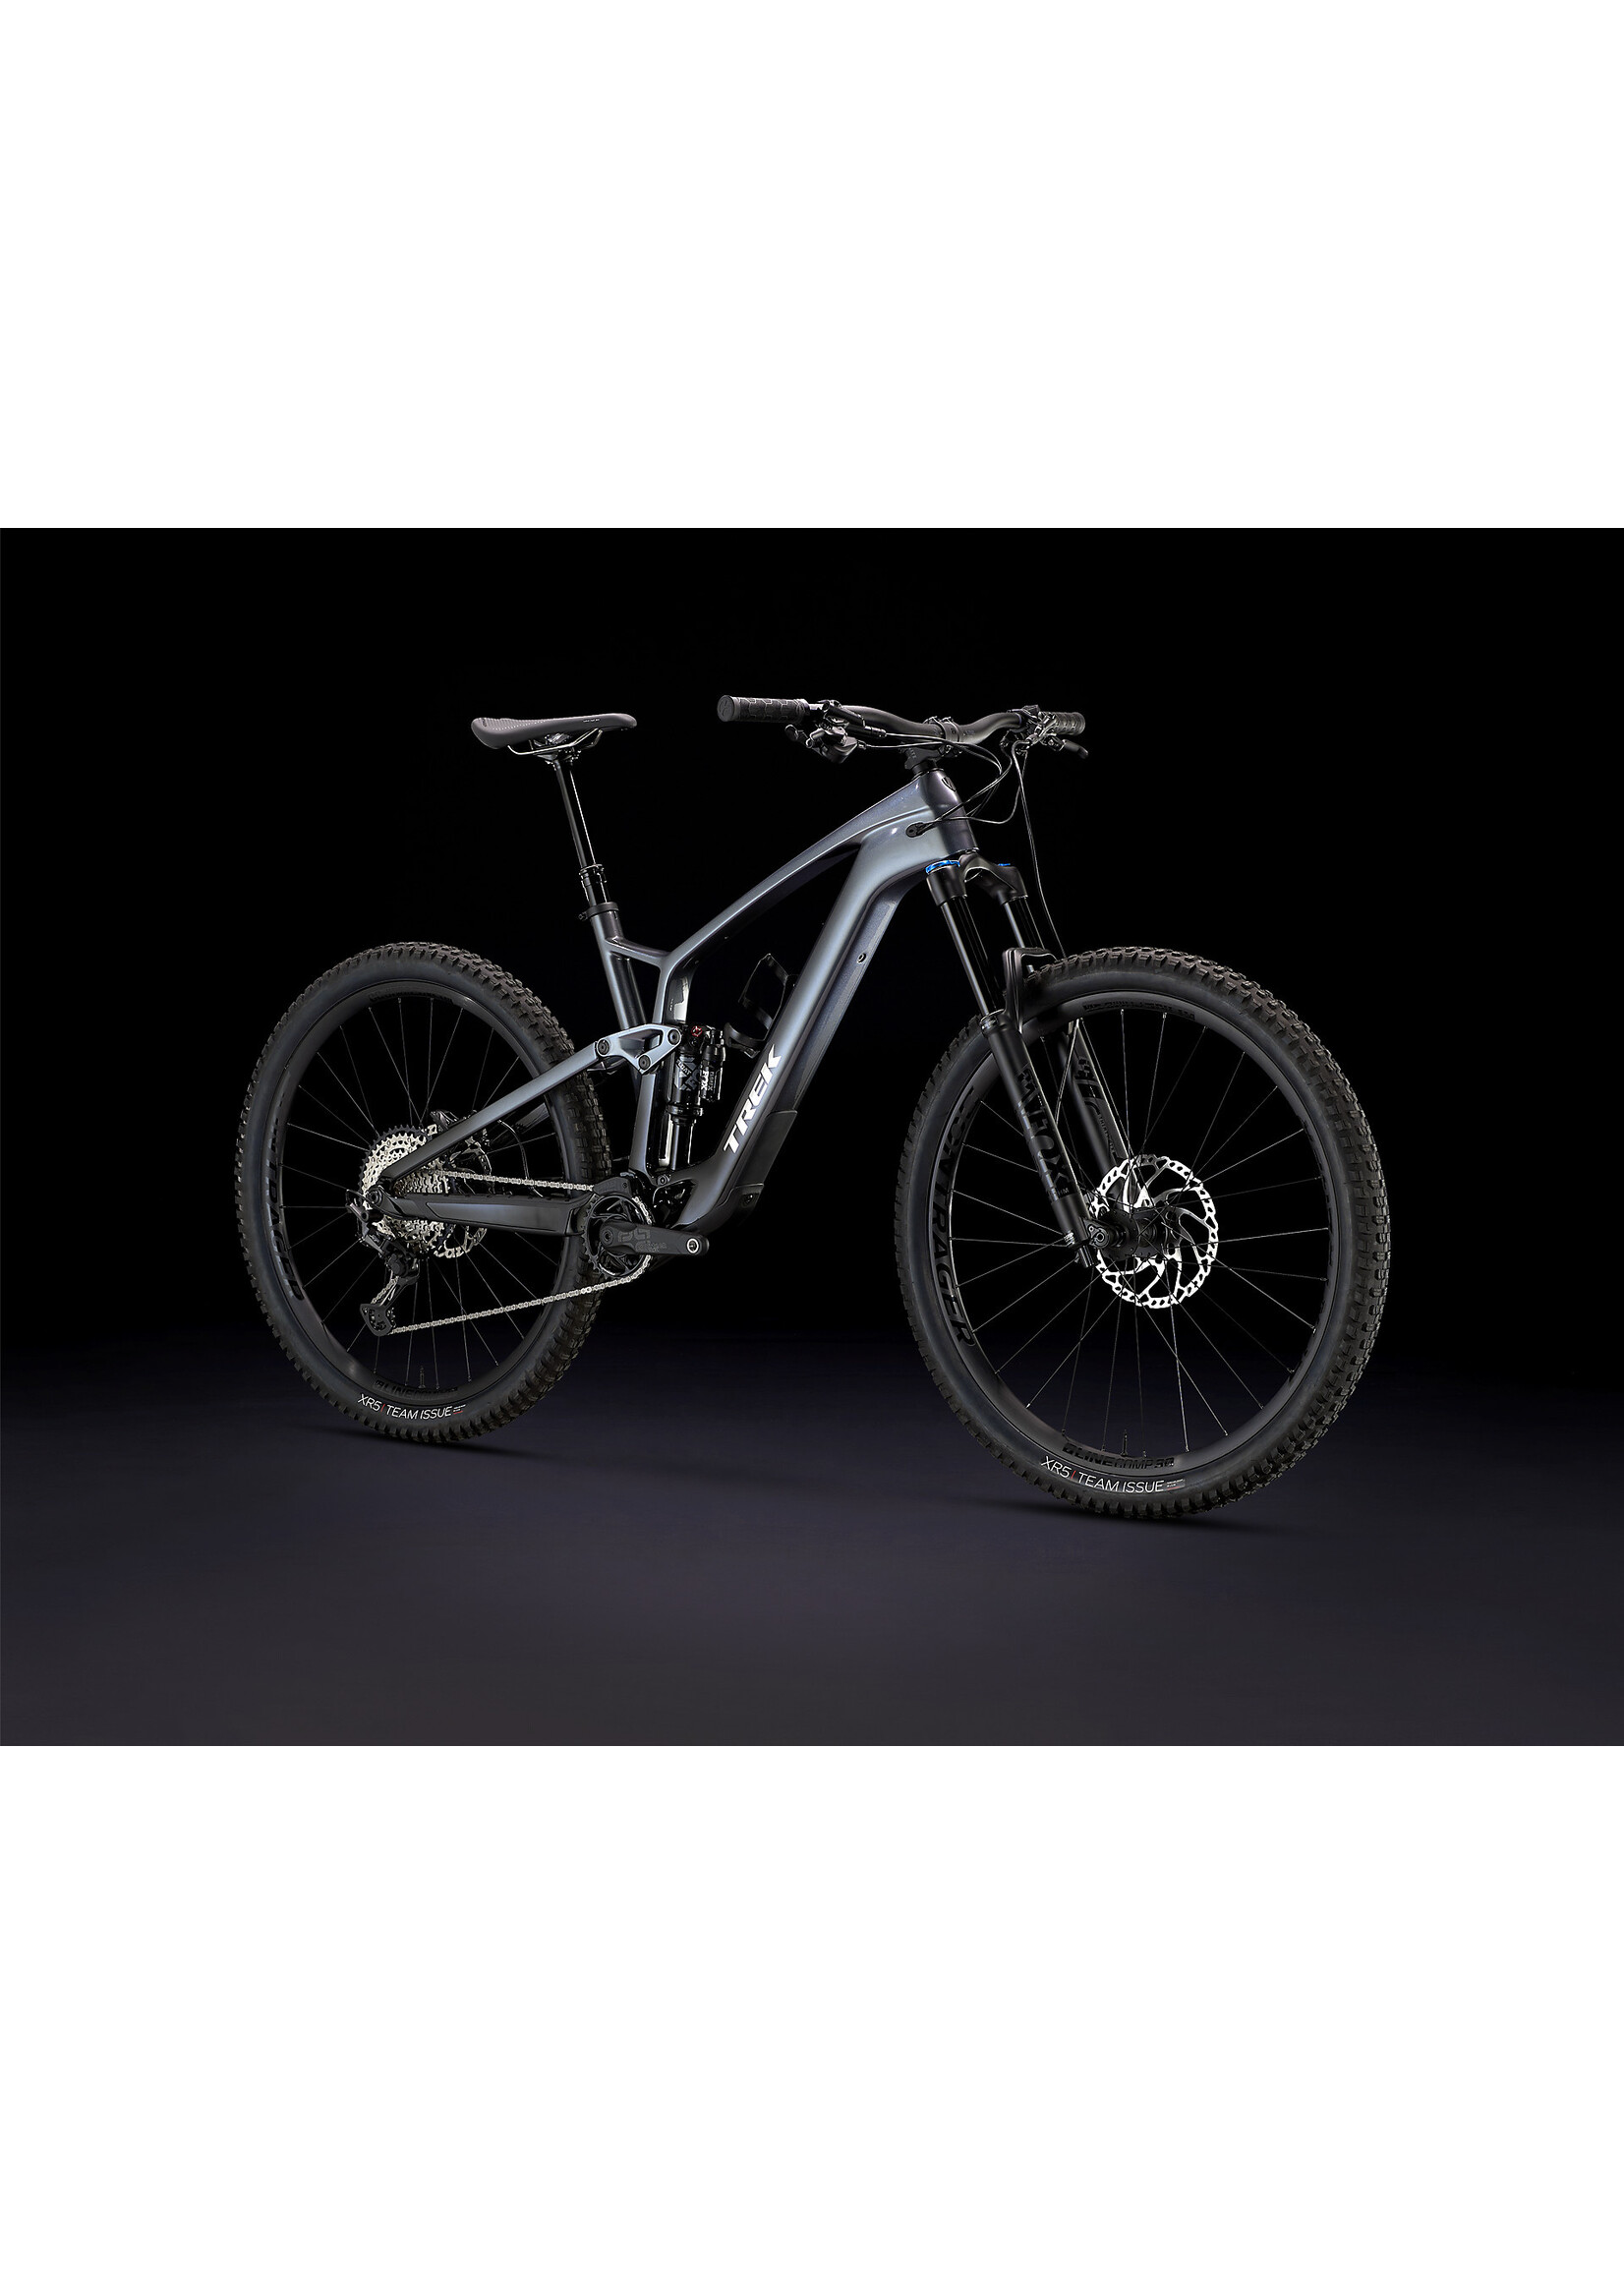 Trek Fuel EXe 9.7  Call store to finish booking